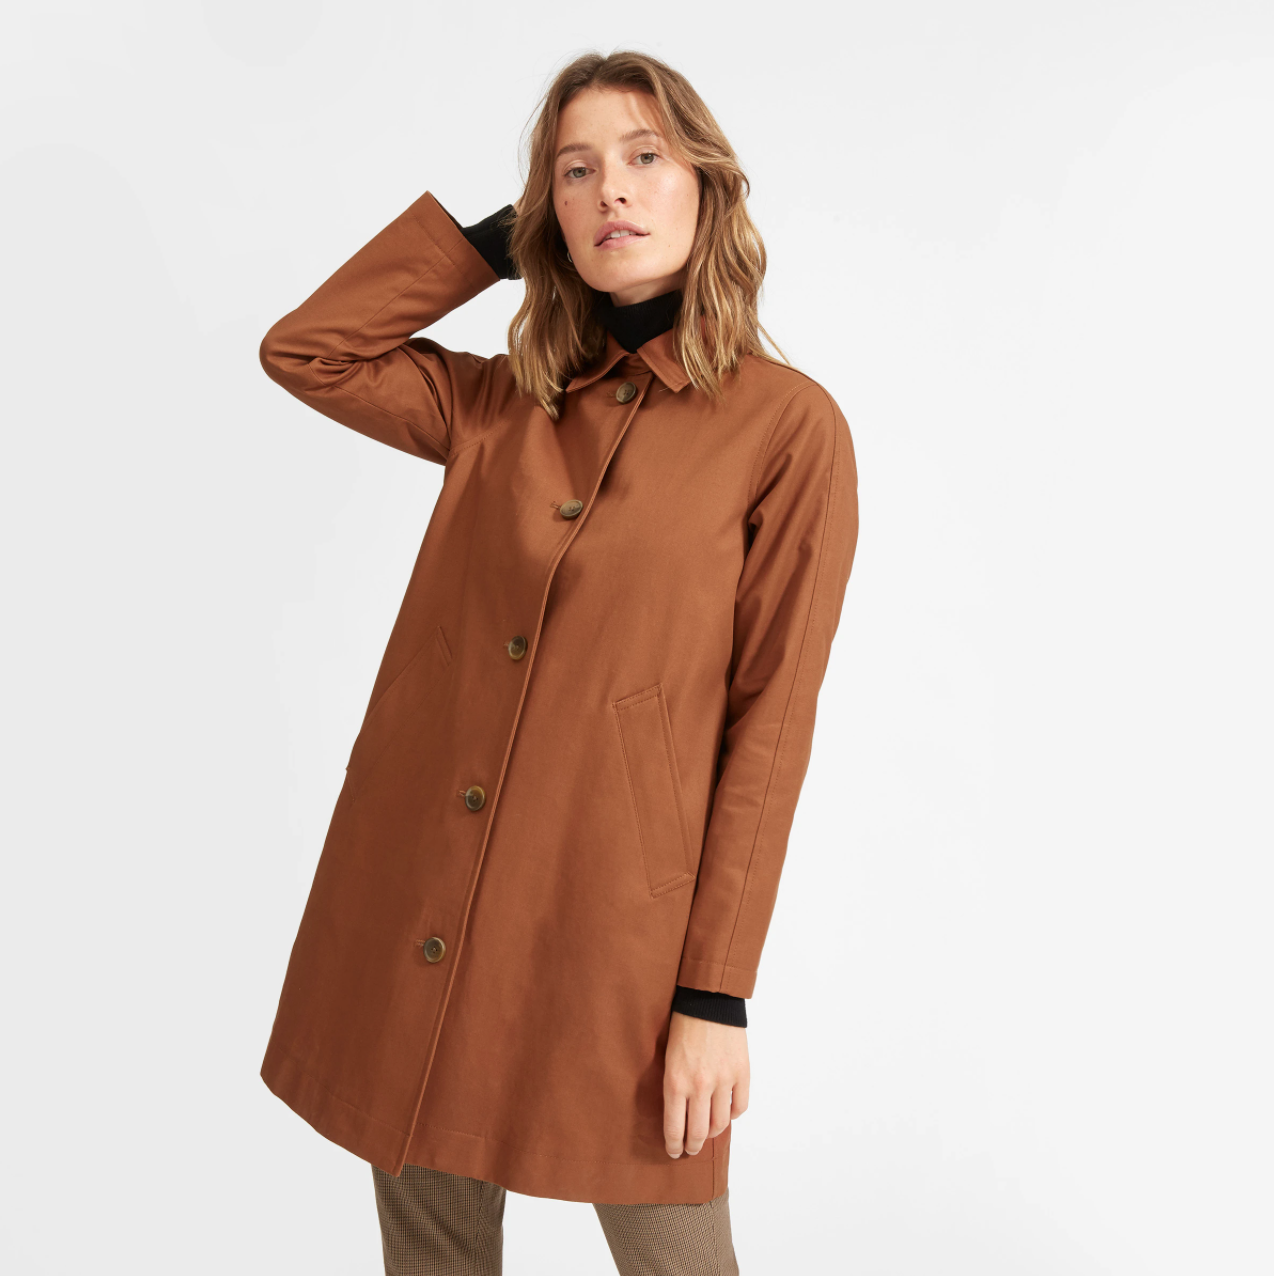 10 Trench Coats for Spring Layering - V Magazine